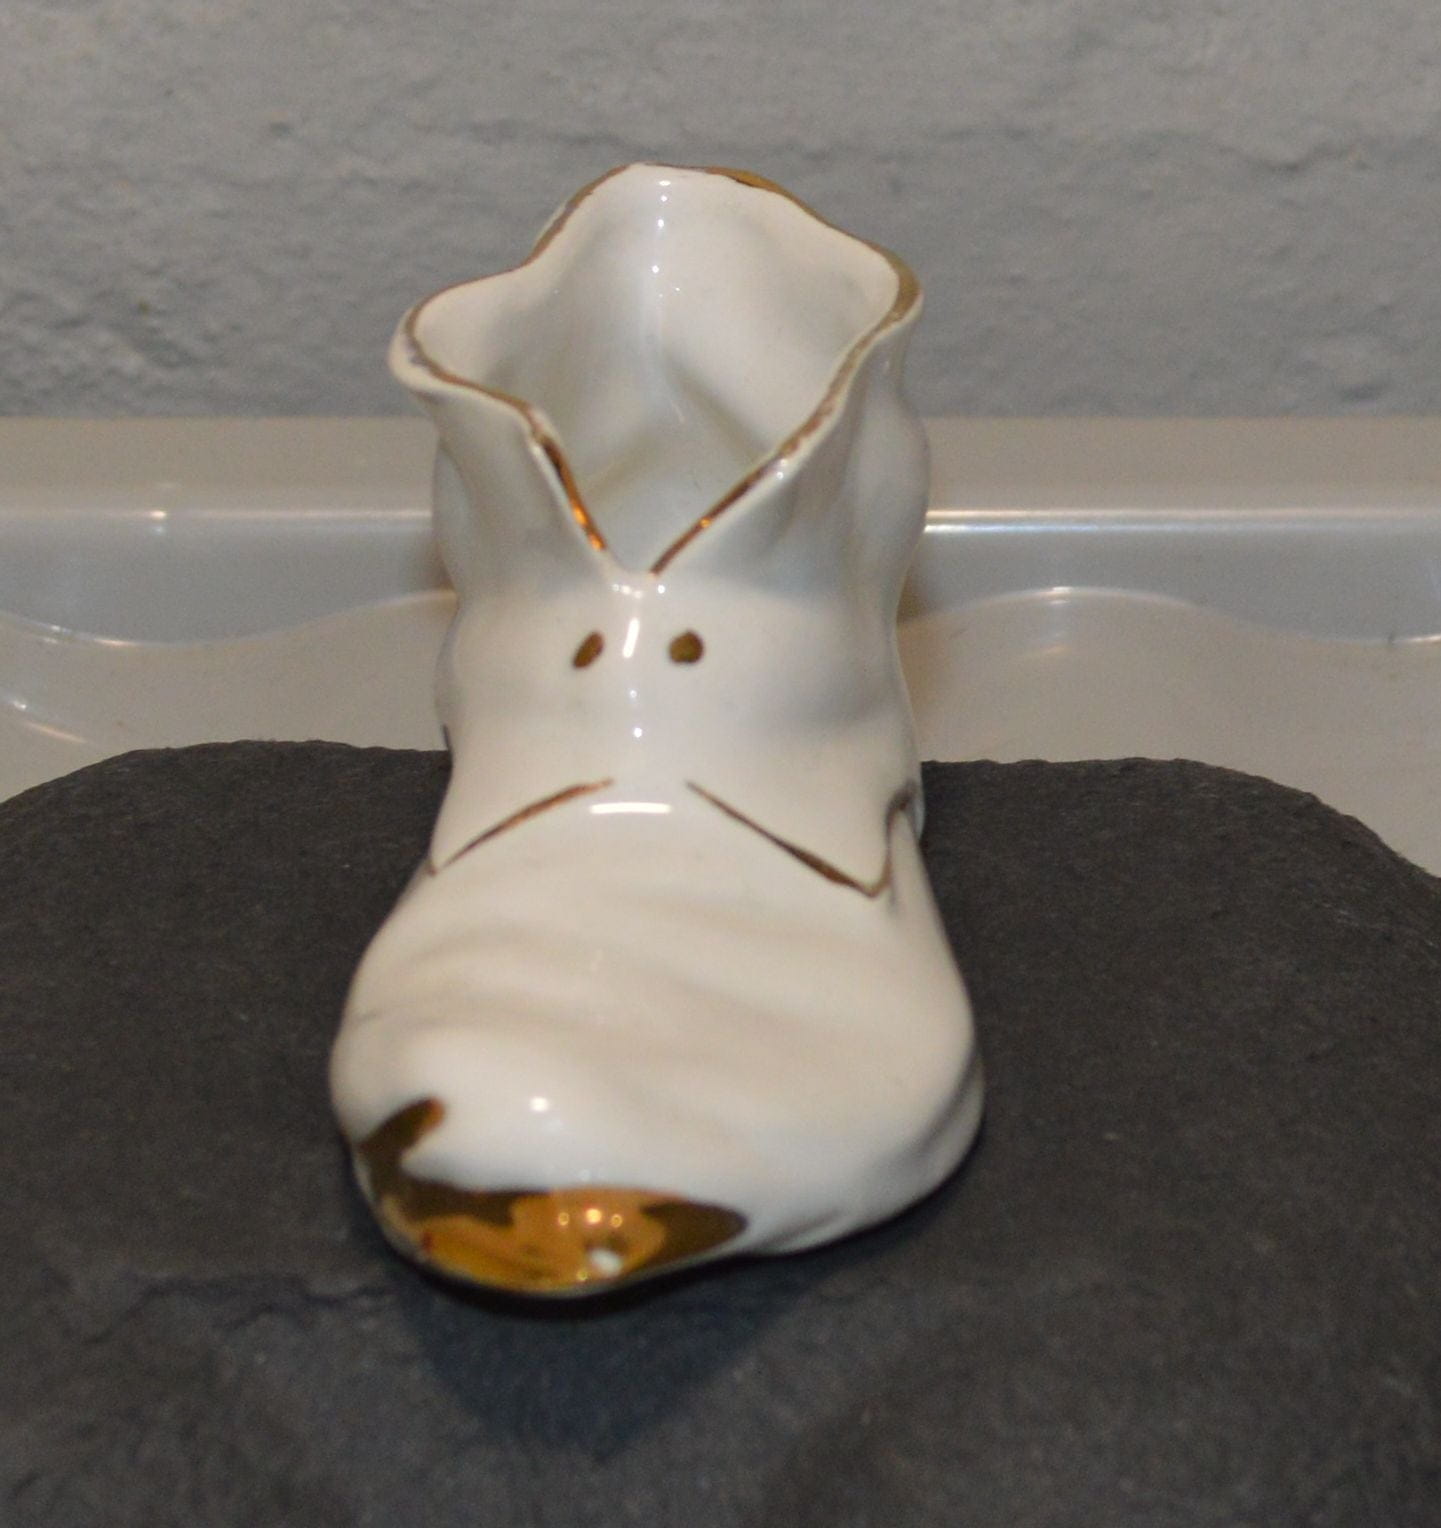 FIVE ORNAMENTAL BOOTS KEELE STREET POTTERY CROCHENDY AND OTHERS(PREVIOUSLY OWNED) GOOD CONDITION - TMD167207